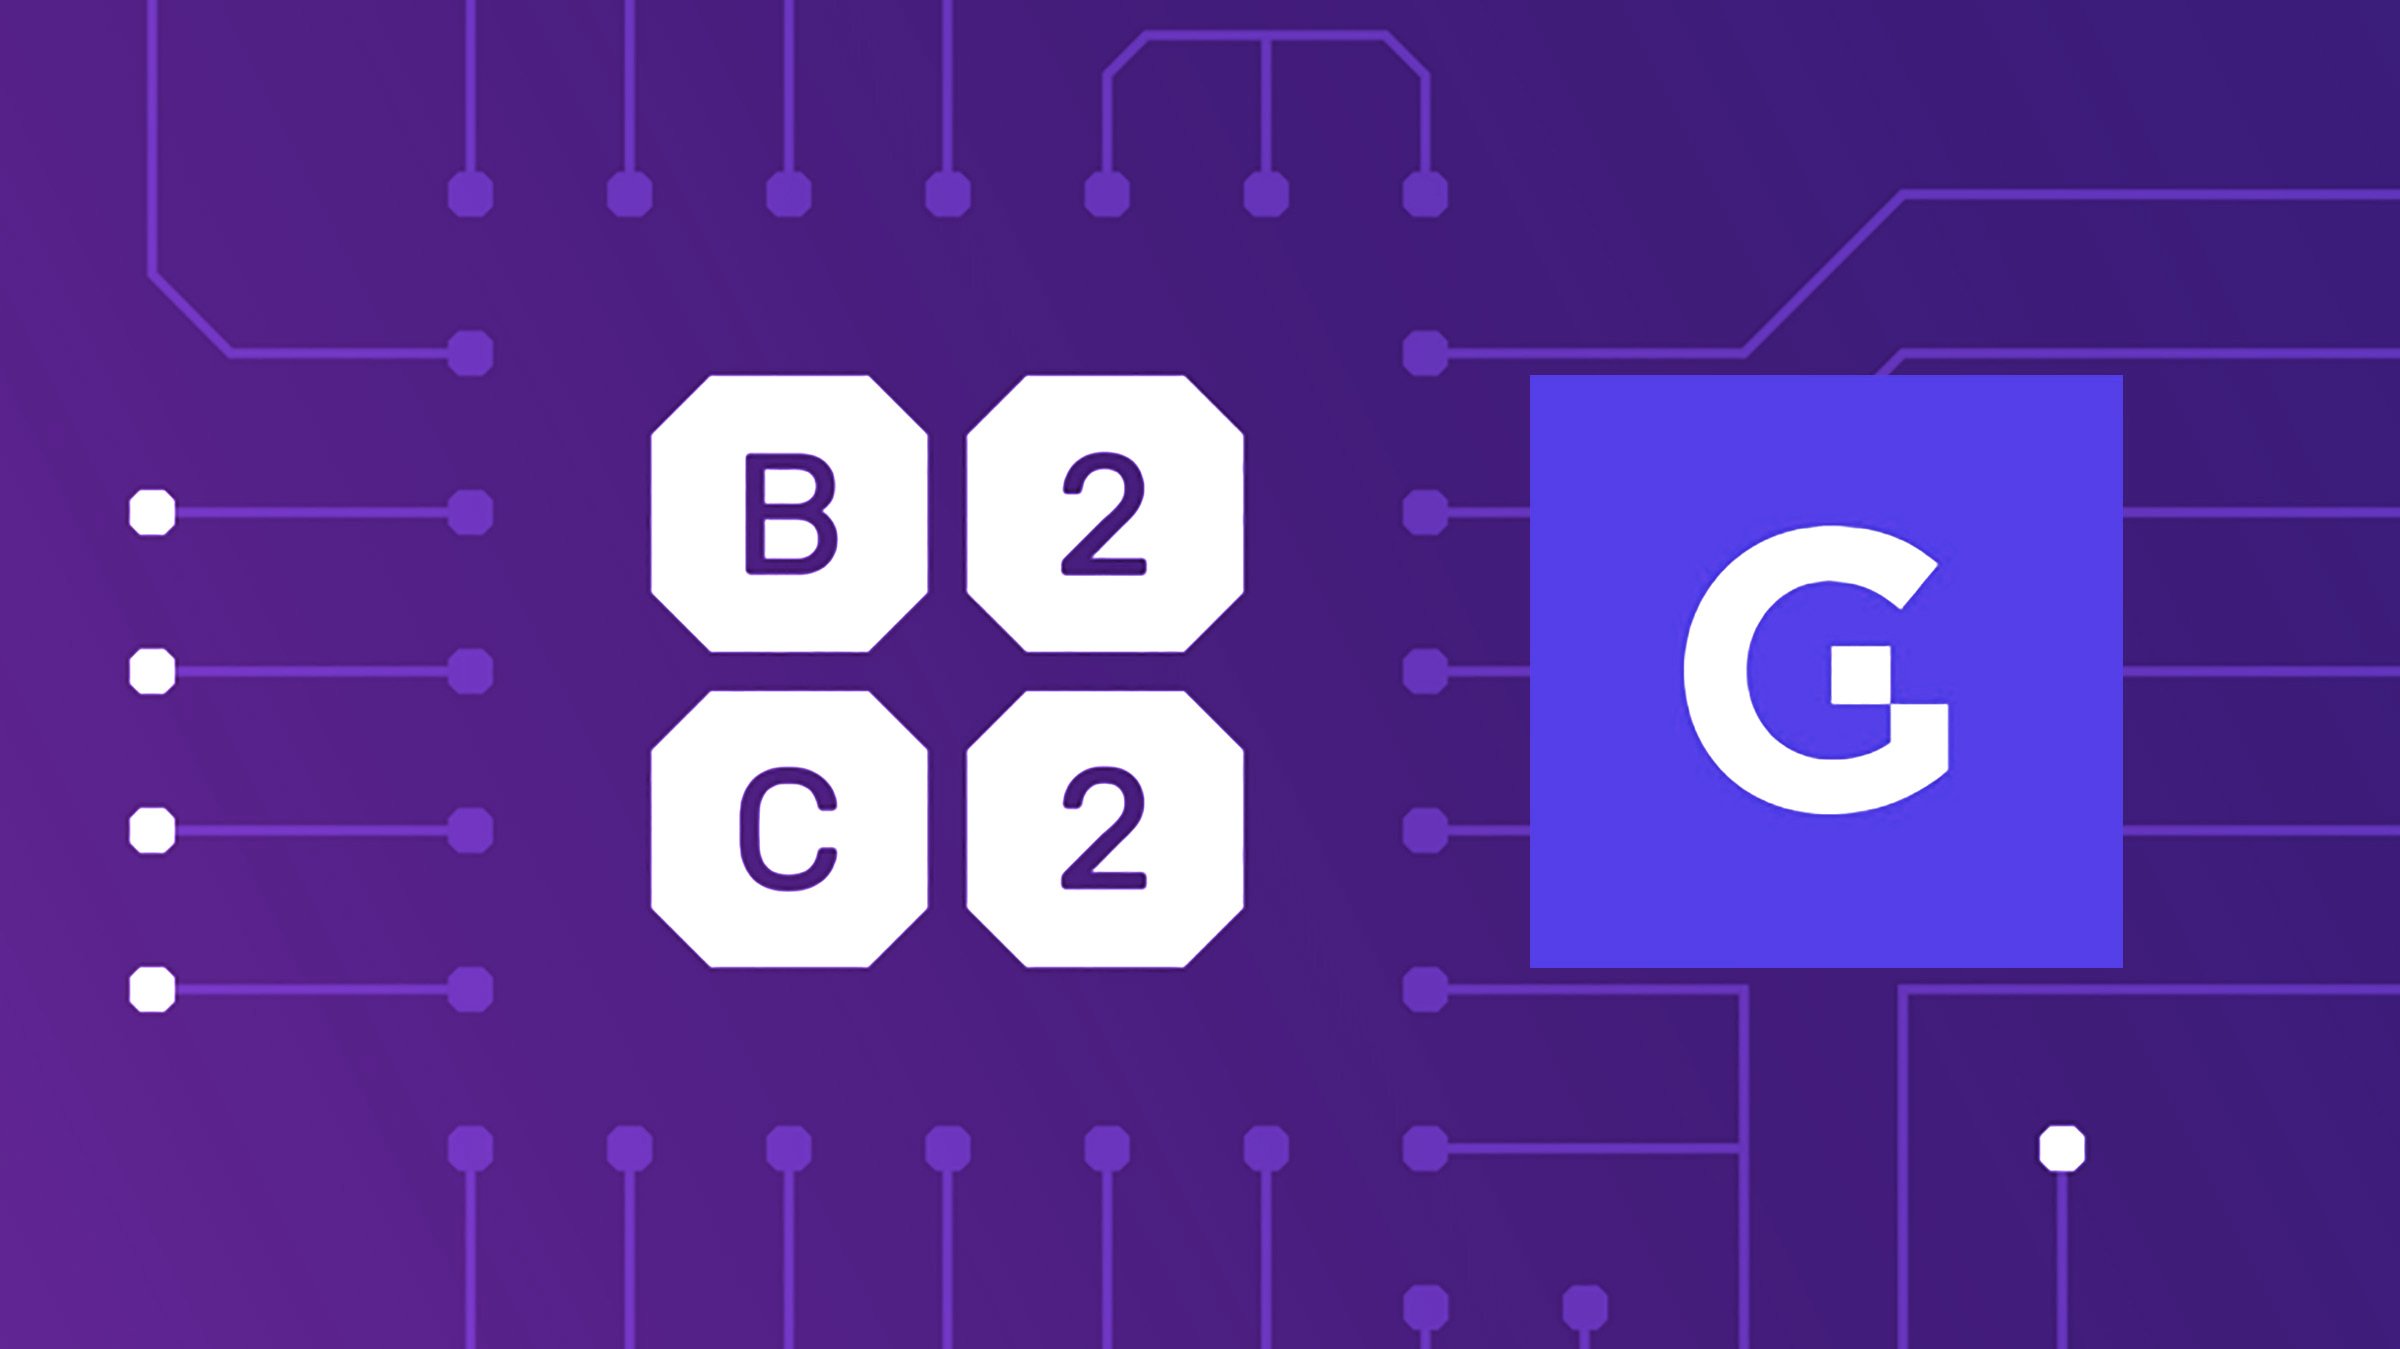 Crypto Liquidity Provider B2C2 Offers to Purchase Loans from Genesis